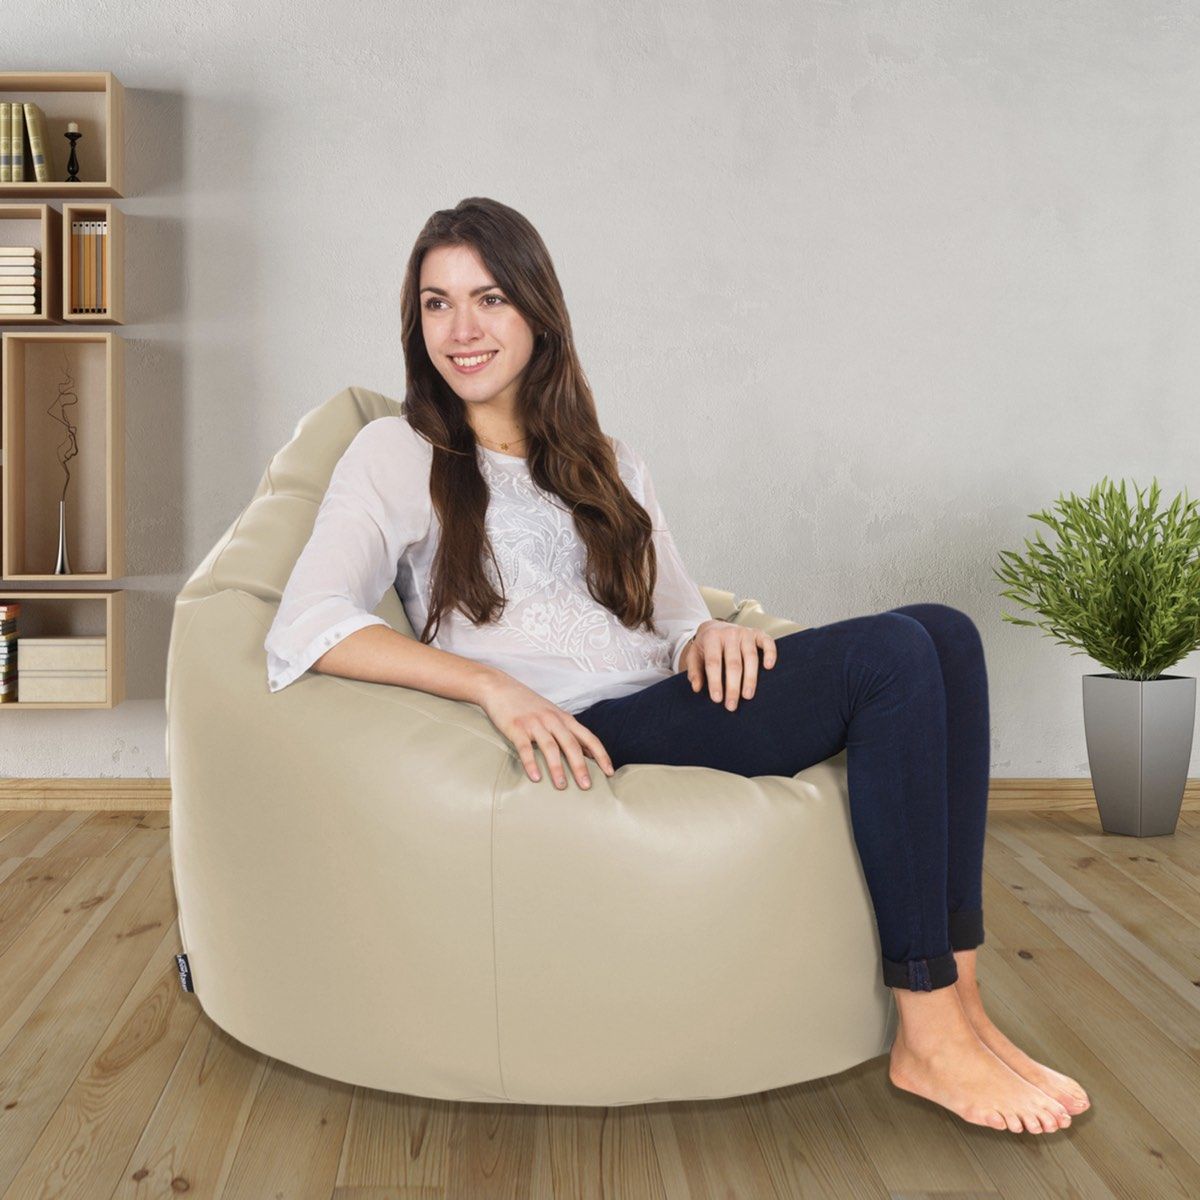 An image of the Real Leather Bean Bag Chair from GreatBeanBags